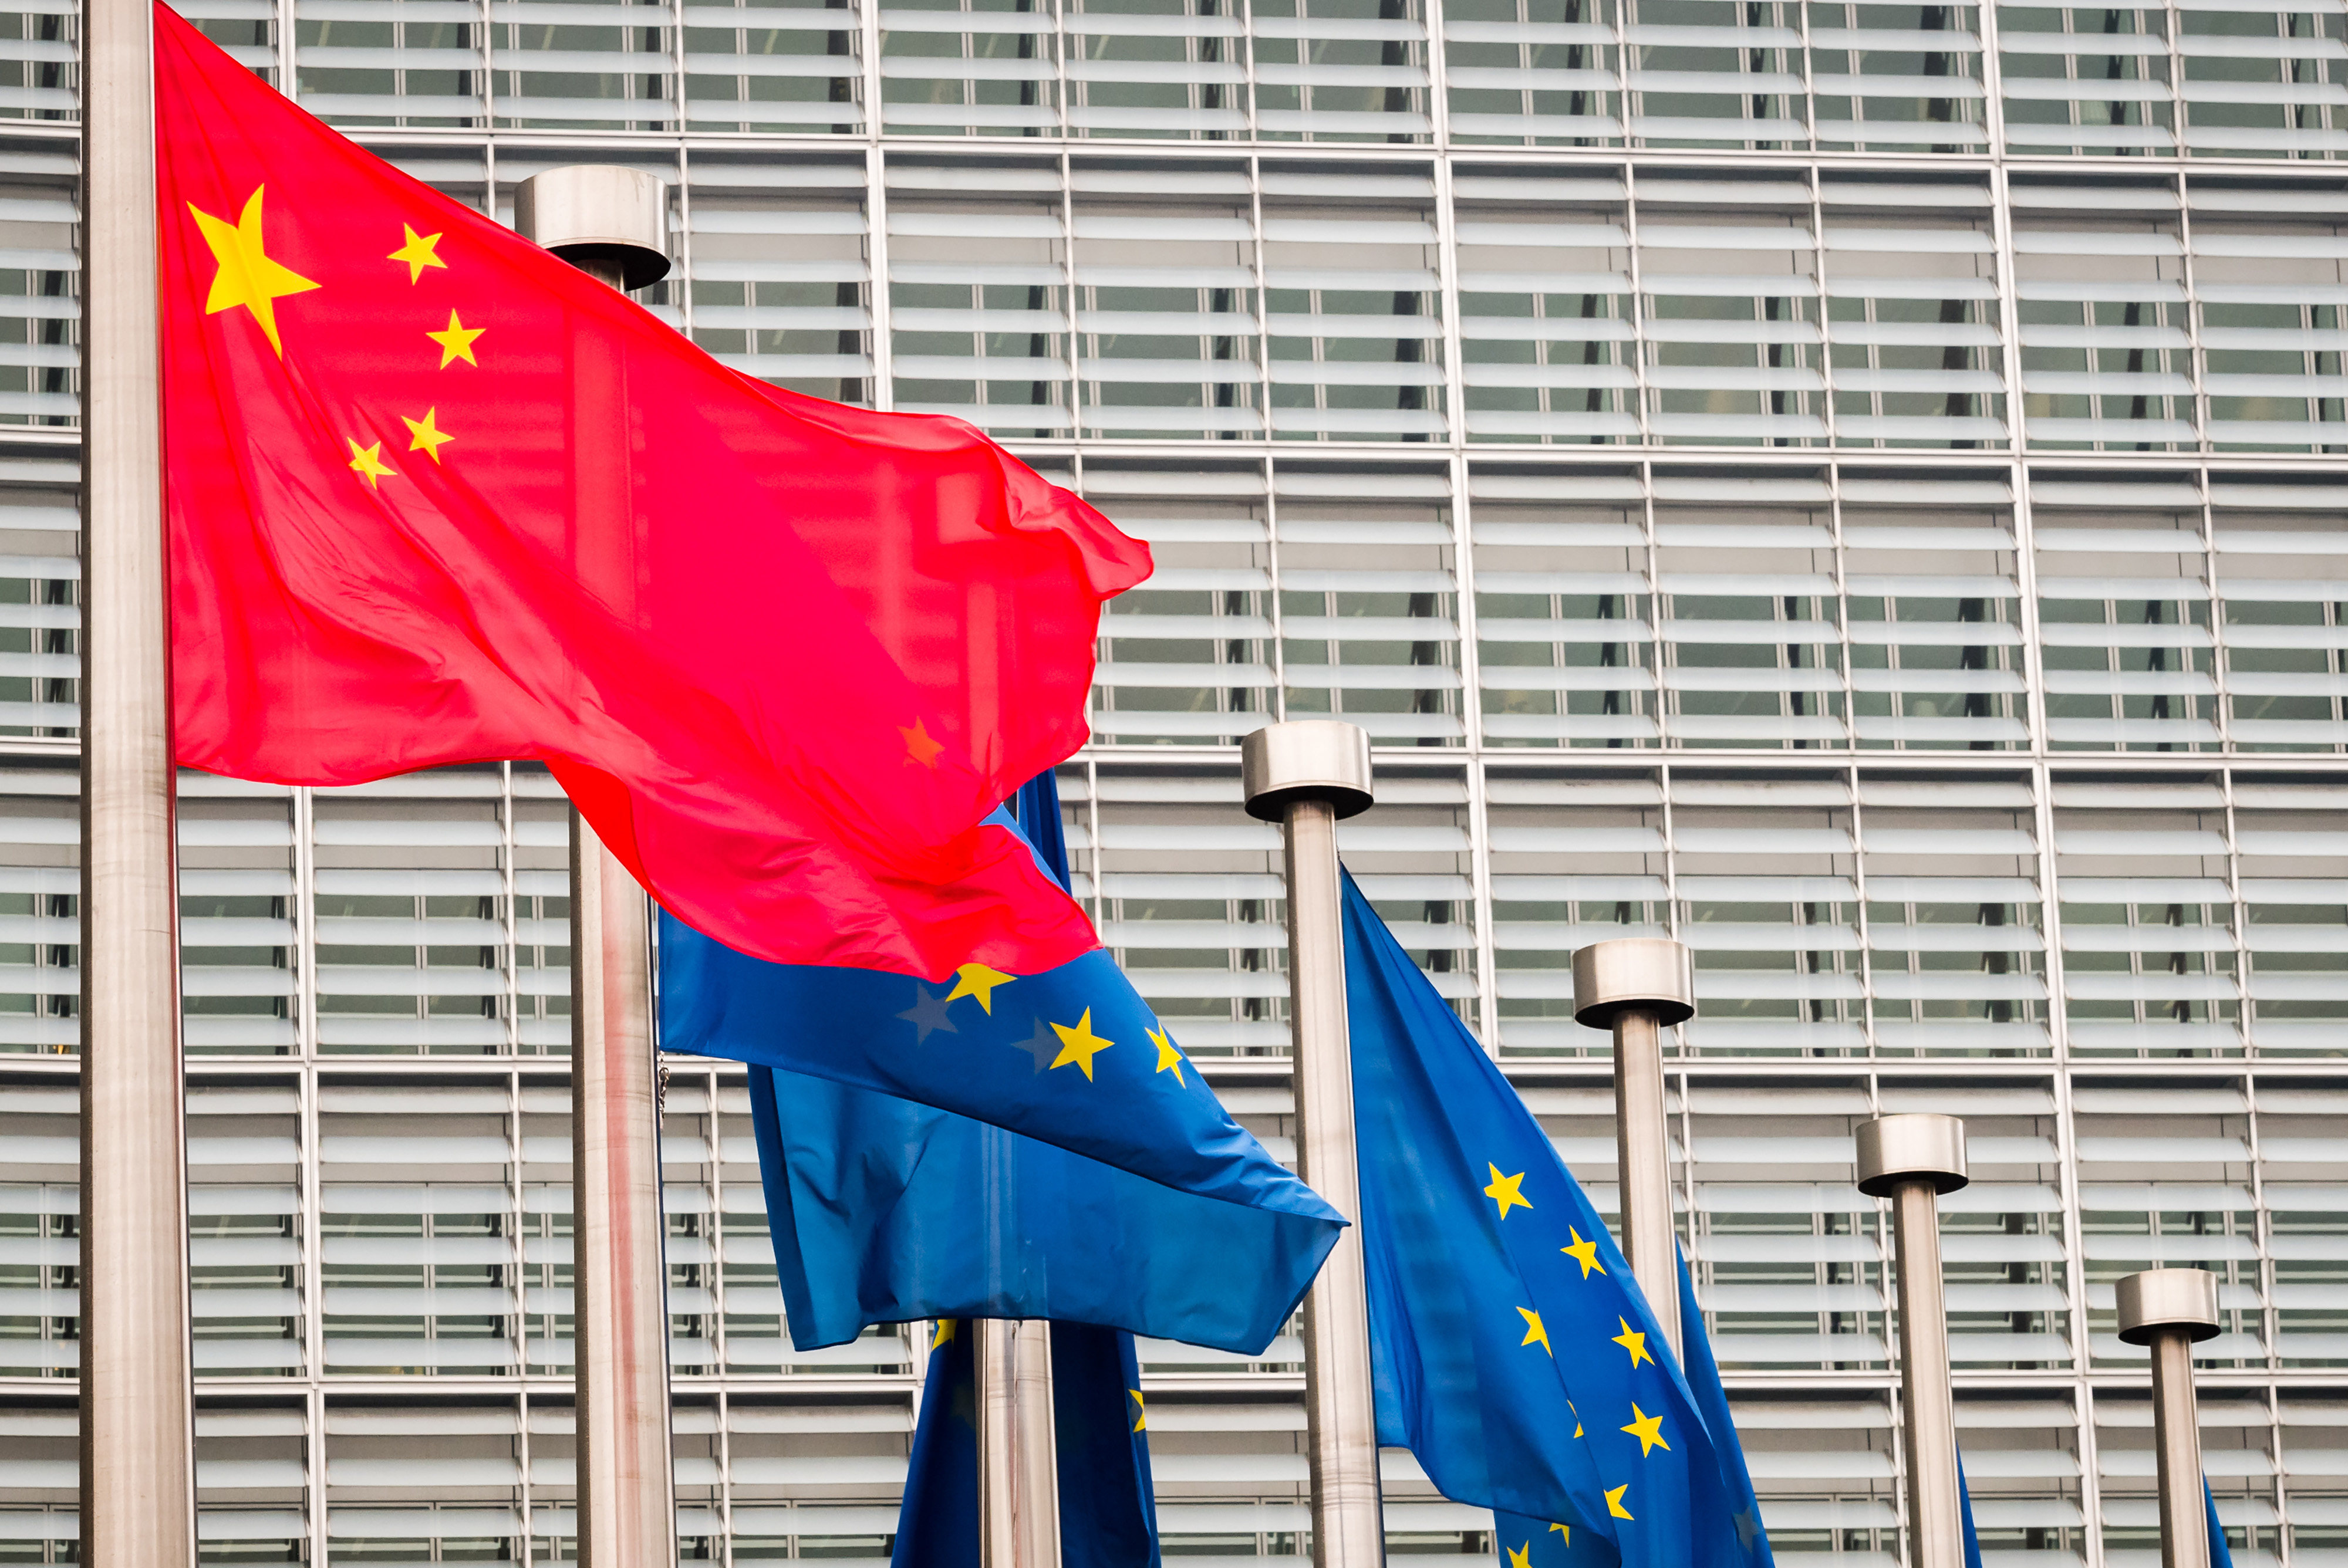 The European Union is poised to sanction Chinese companies after Hungary declared it would not veto the latest punitive package aimed at Russia. Photo: Bloomberg